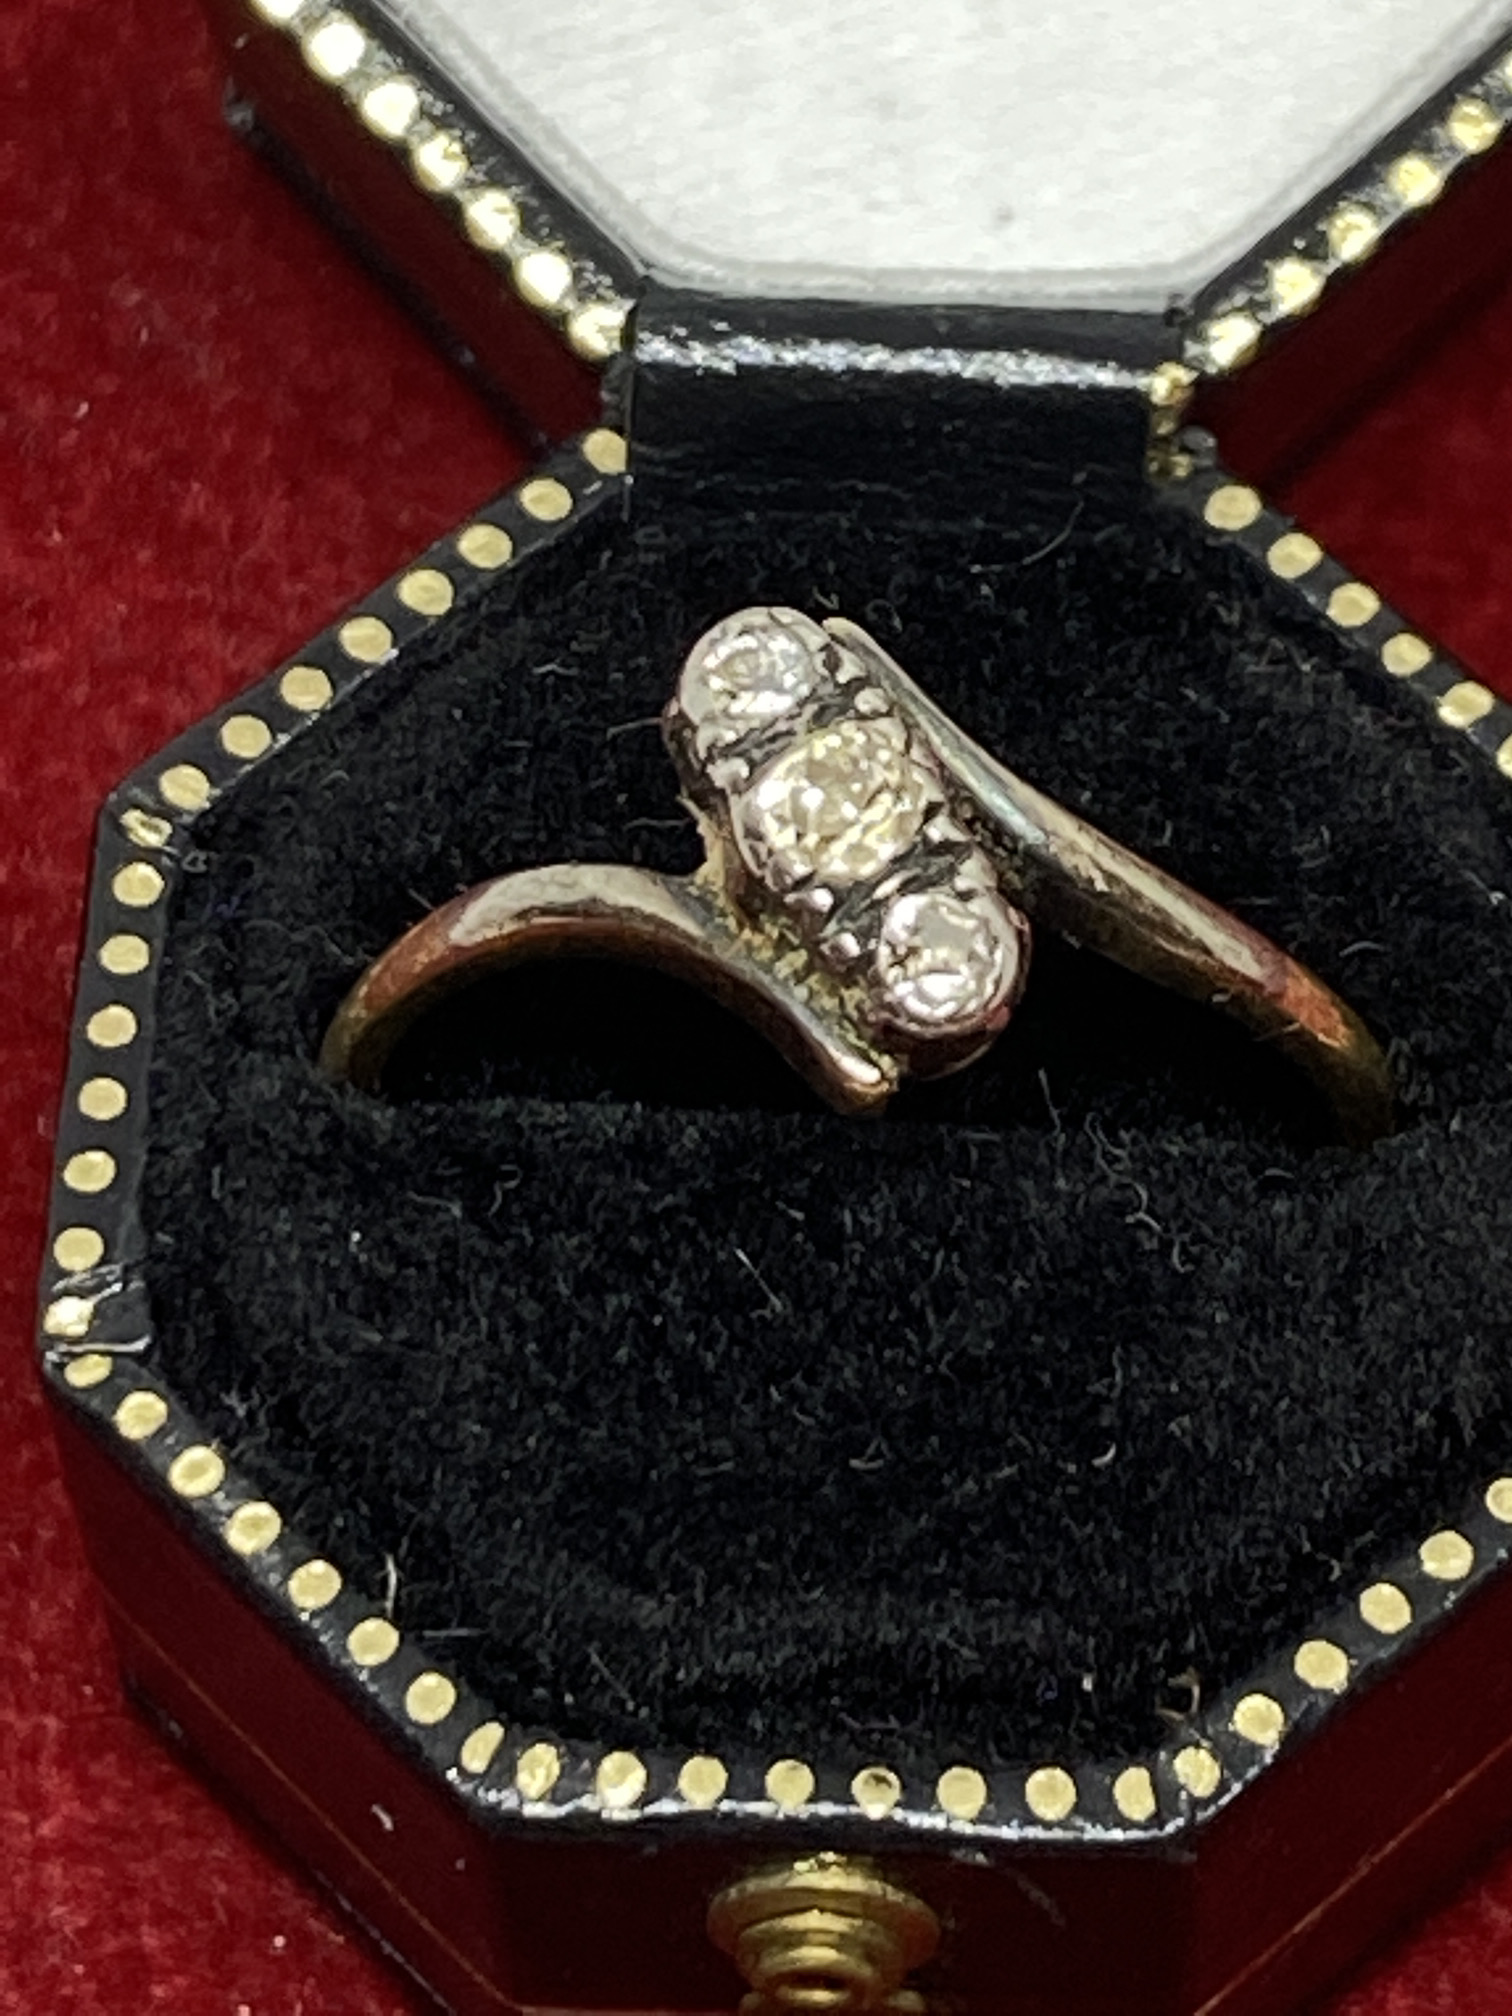 ANTIQUE 18ct GOLD DIAMOND RING IN VINTAGE BOX - Image 2 of 4